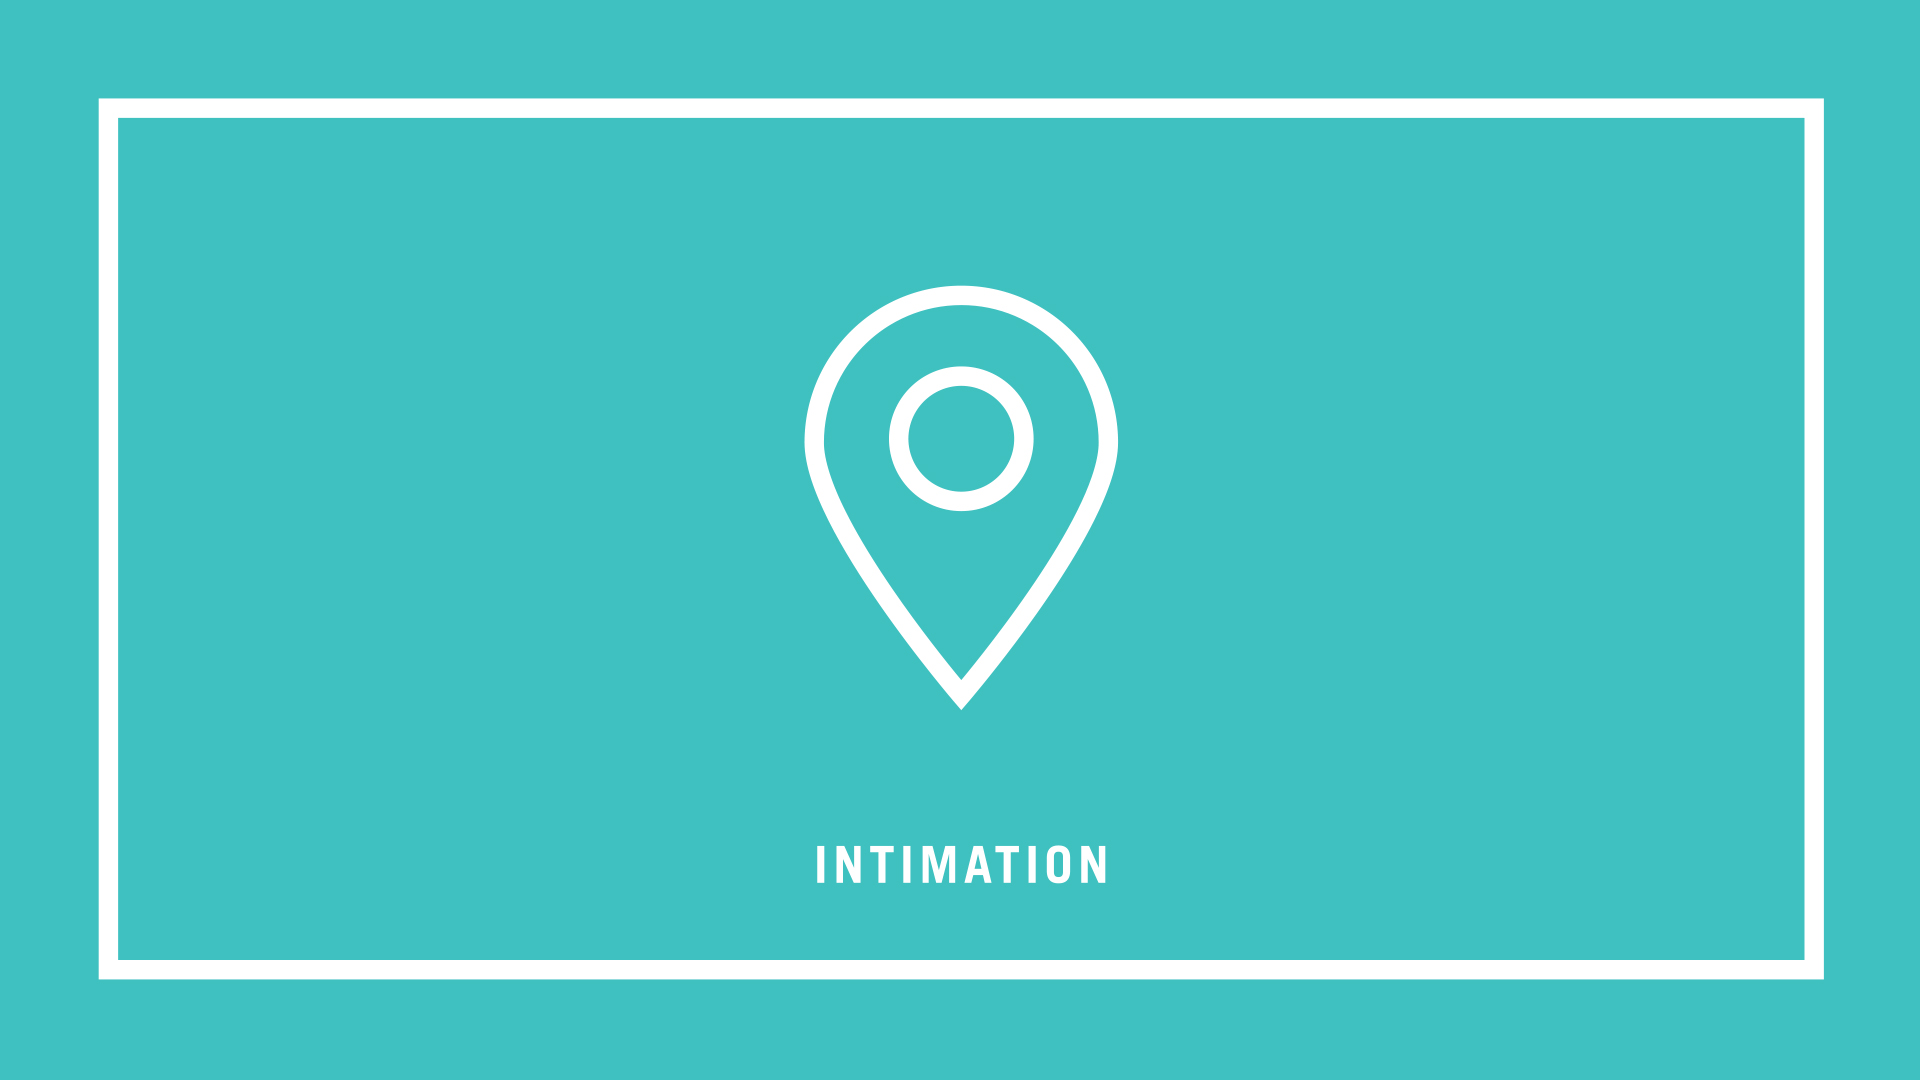 INTIMATION EXPANDS TO ELGIN